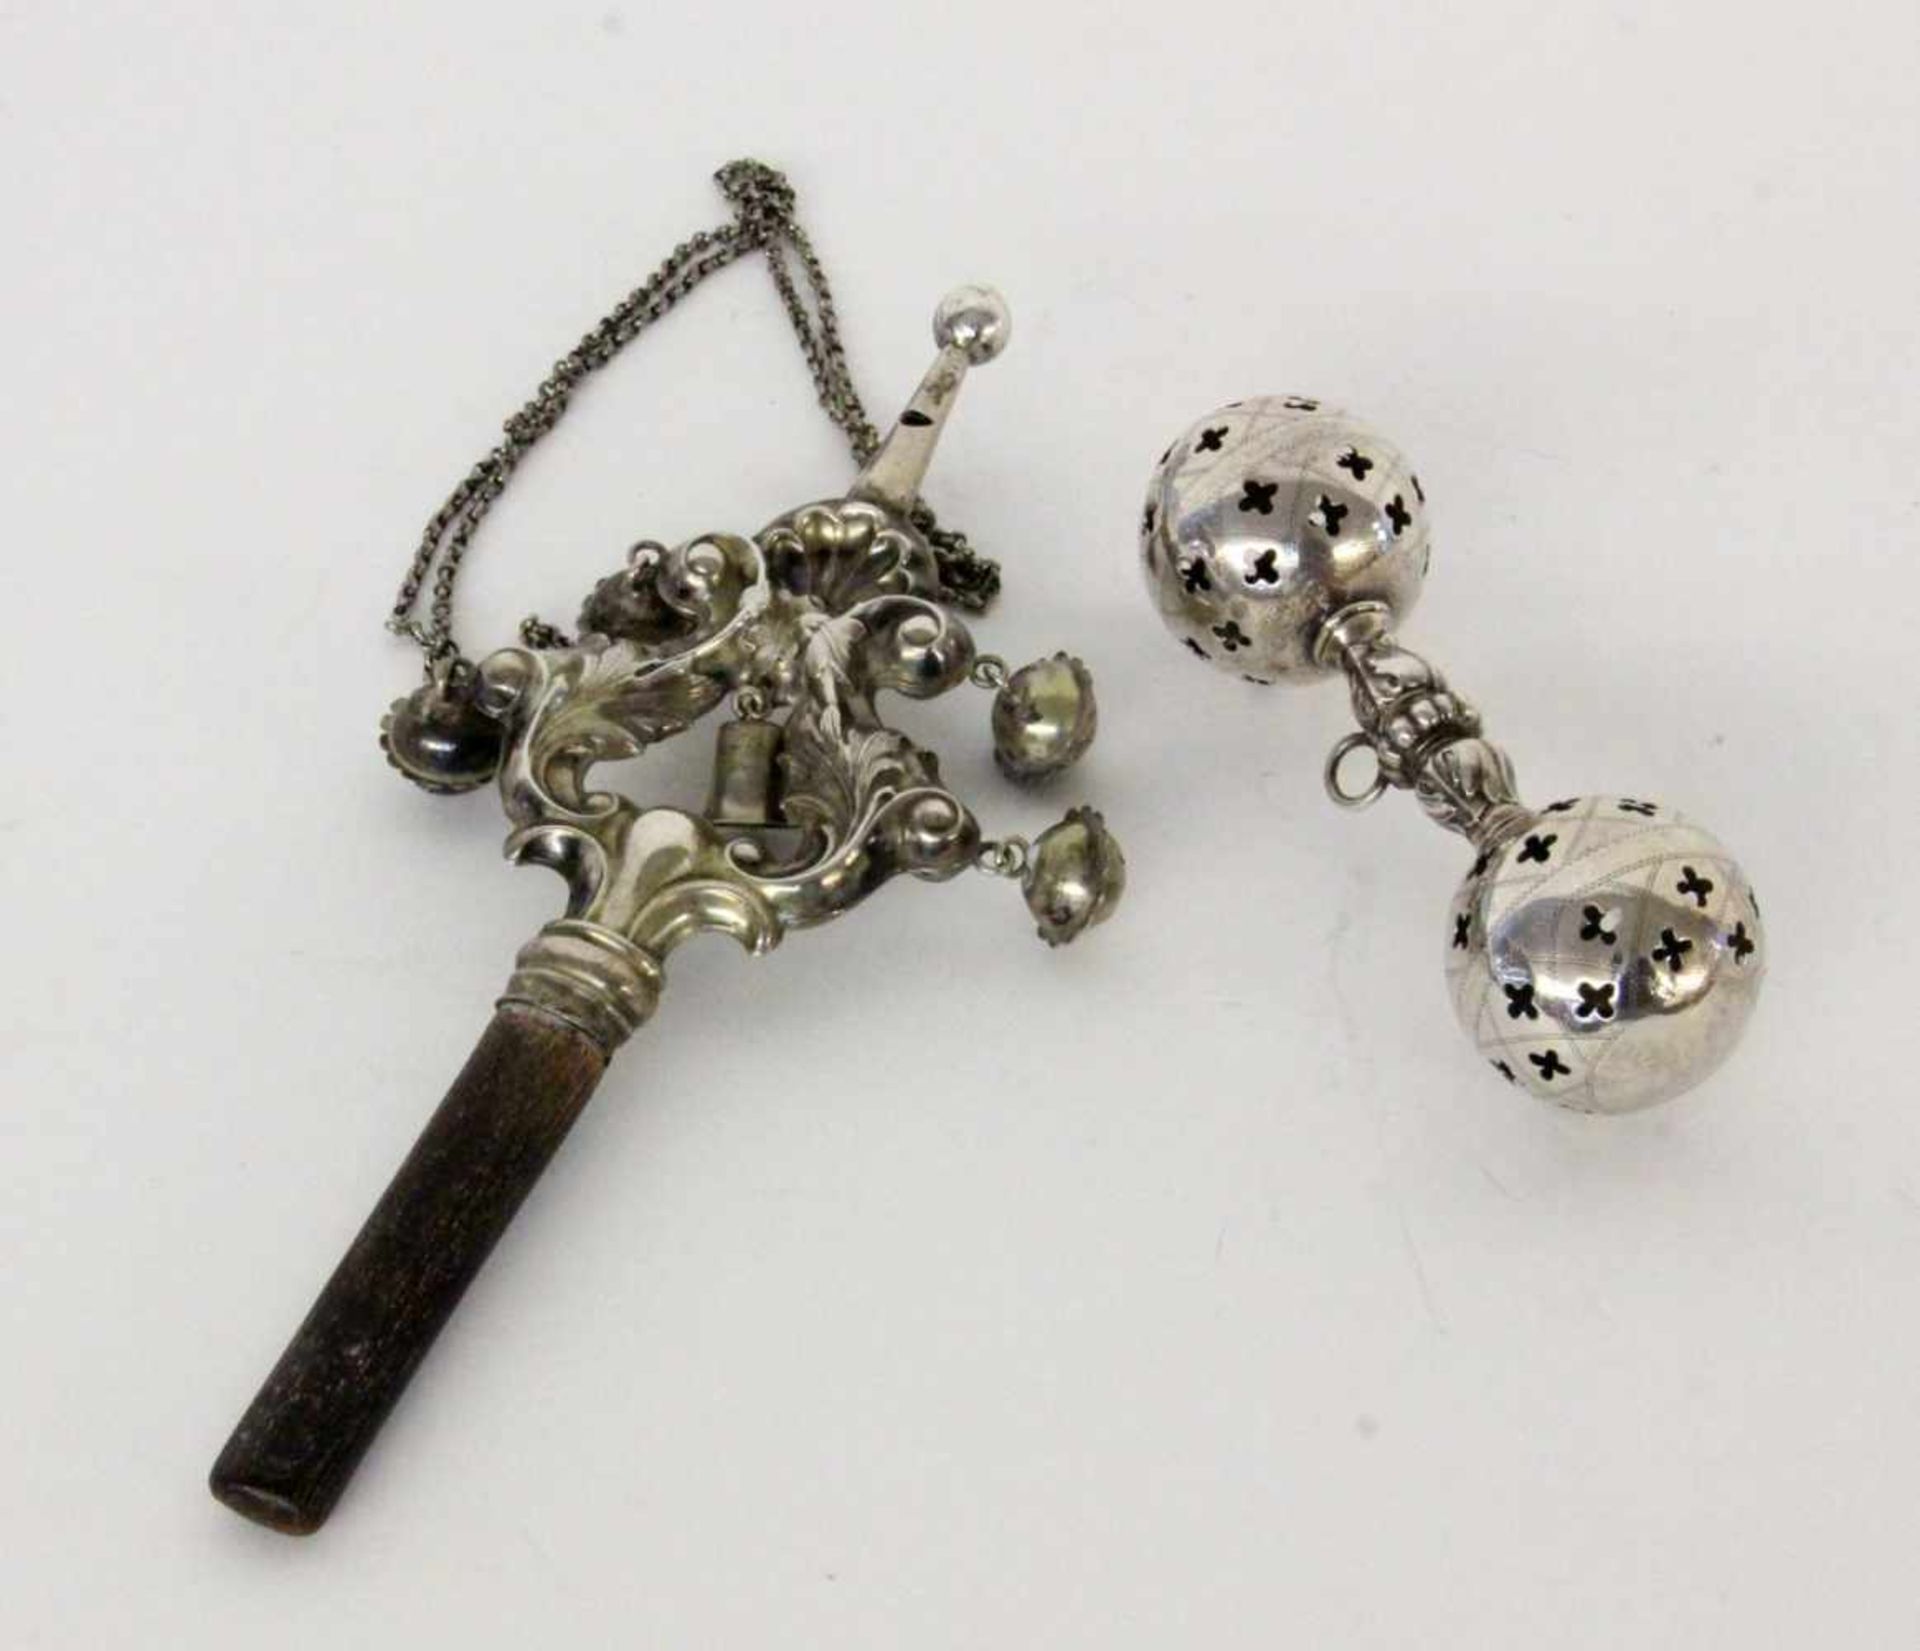 ''TWO OLD CHILDREN'S RATTLES, circa 1900 Silver-platedKeywords: toys''